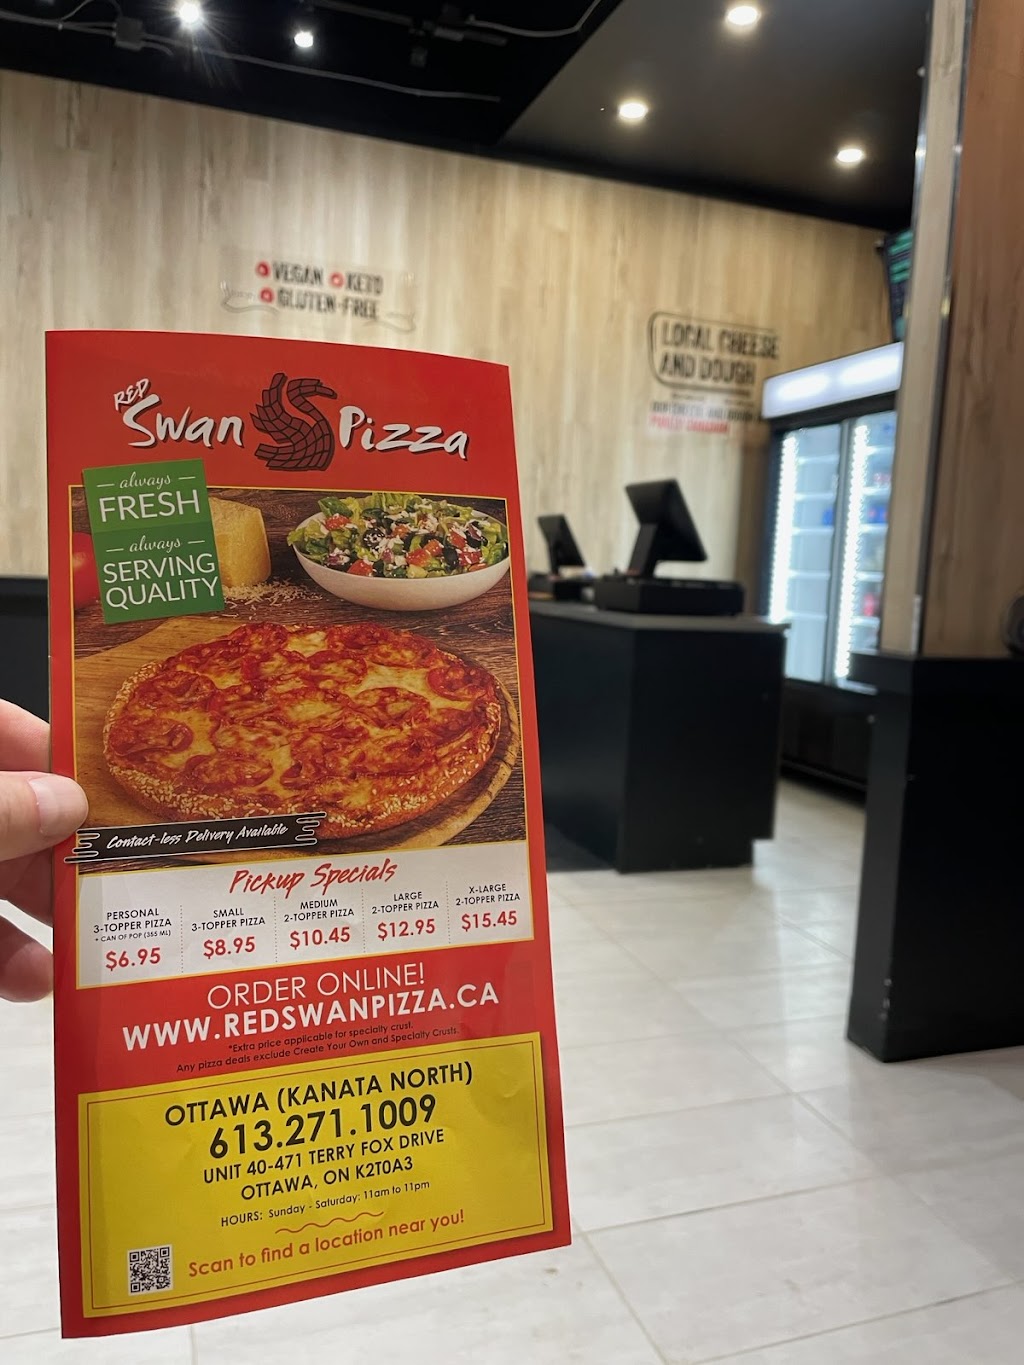 Red Swan Pizza | 471 Terry Fox Dr Unit #40, Kanata, ON K2T 0A3, Canada | Phone: (613) 271-1009